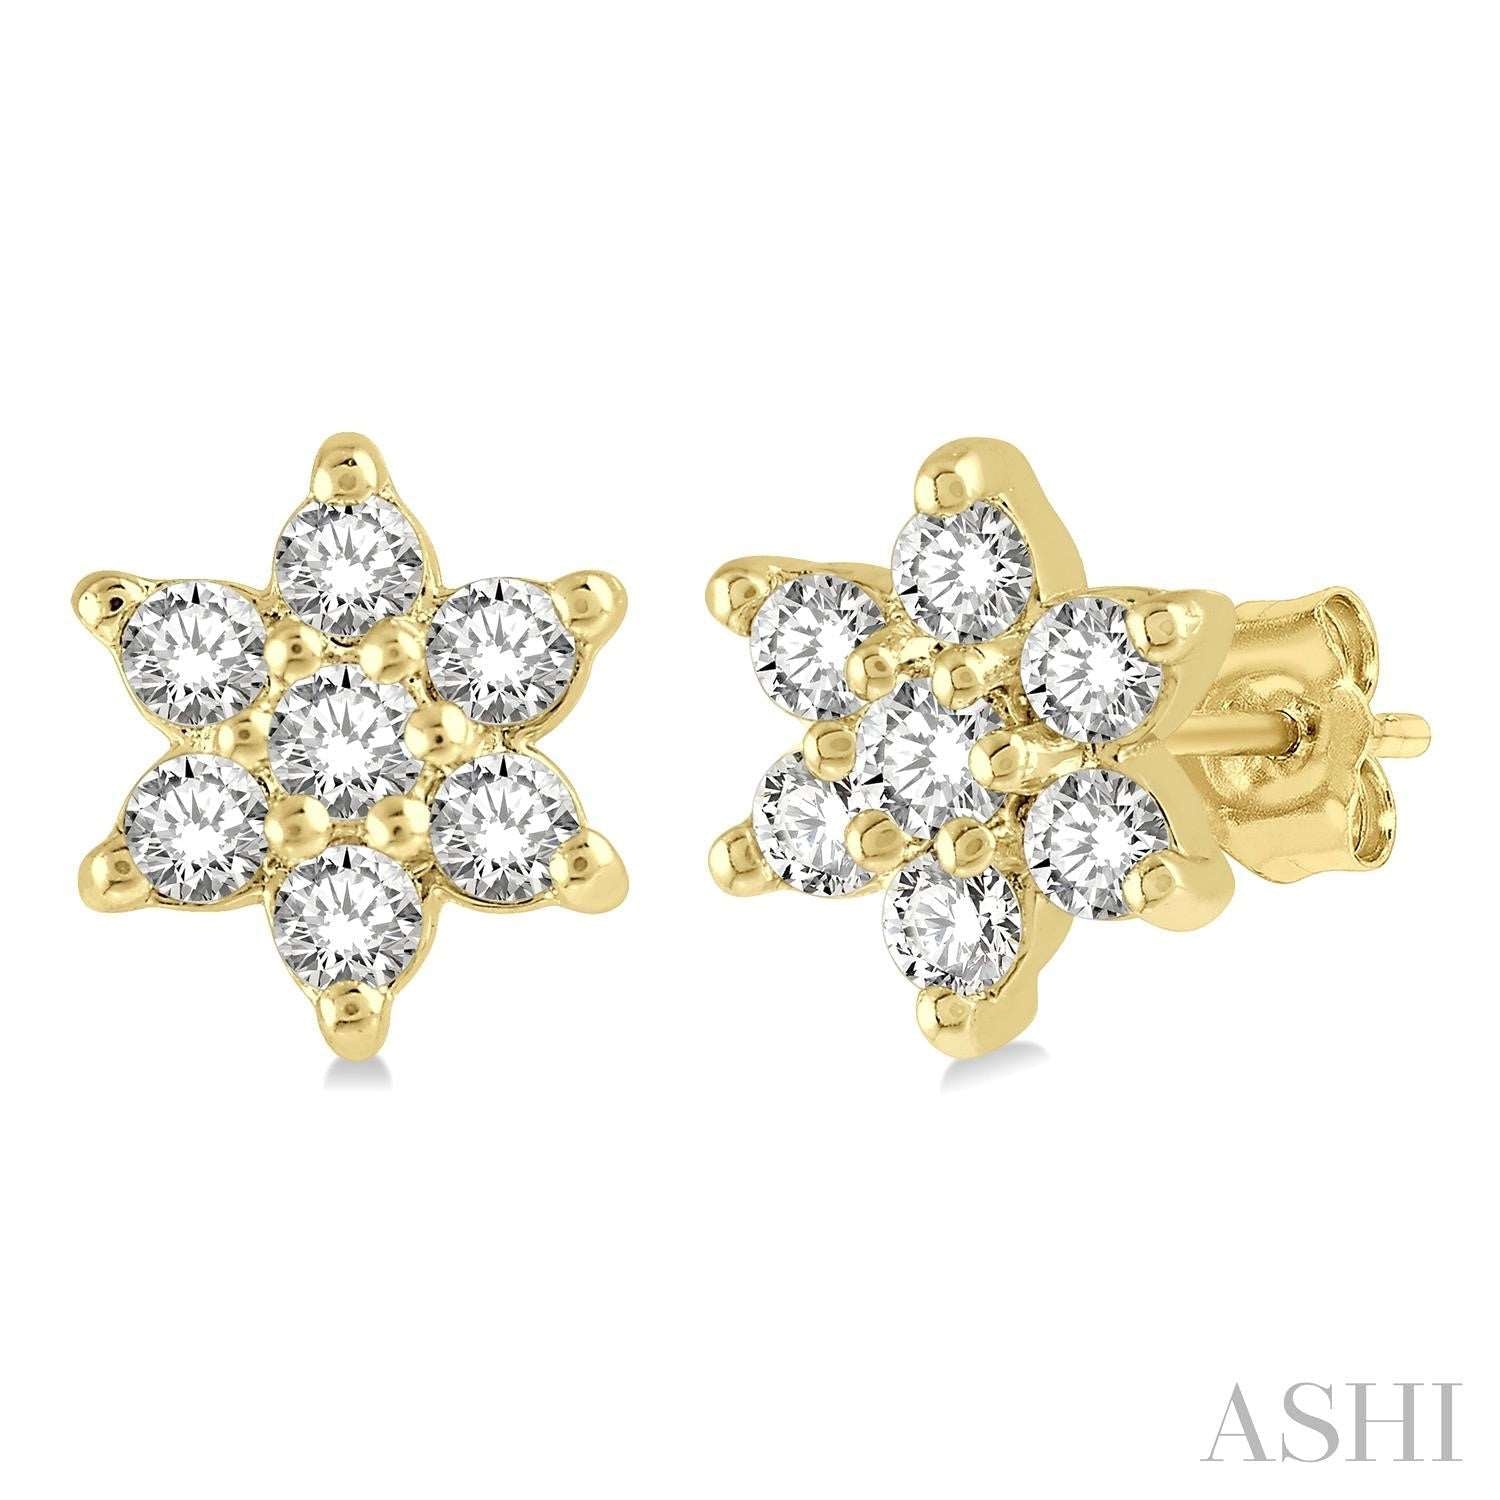 10K Yellow Gold Floral Earrings